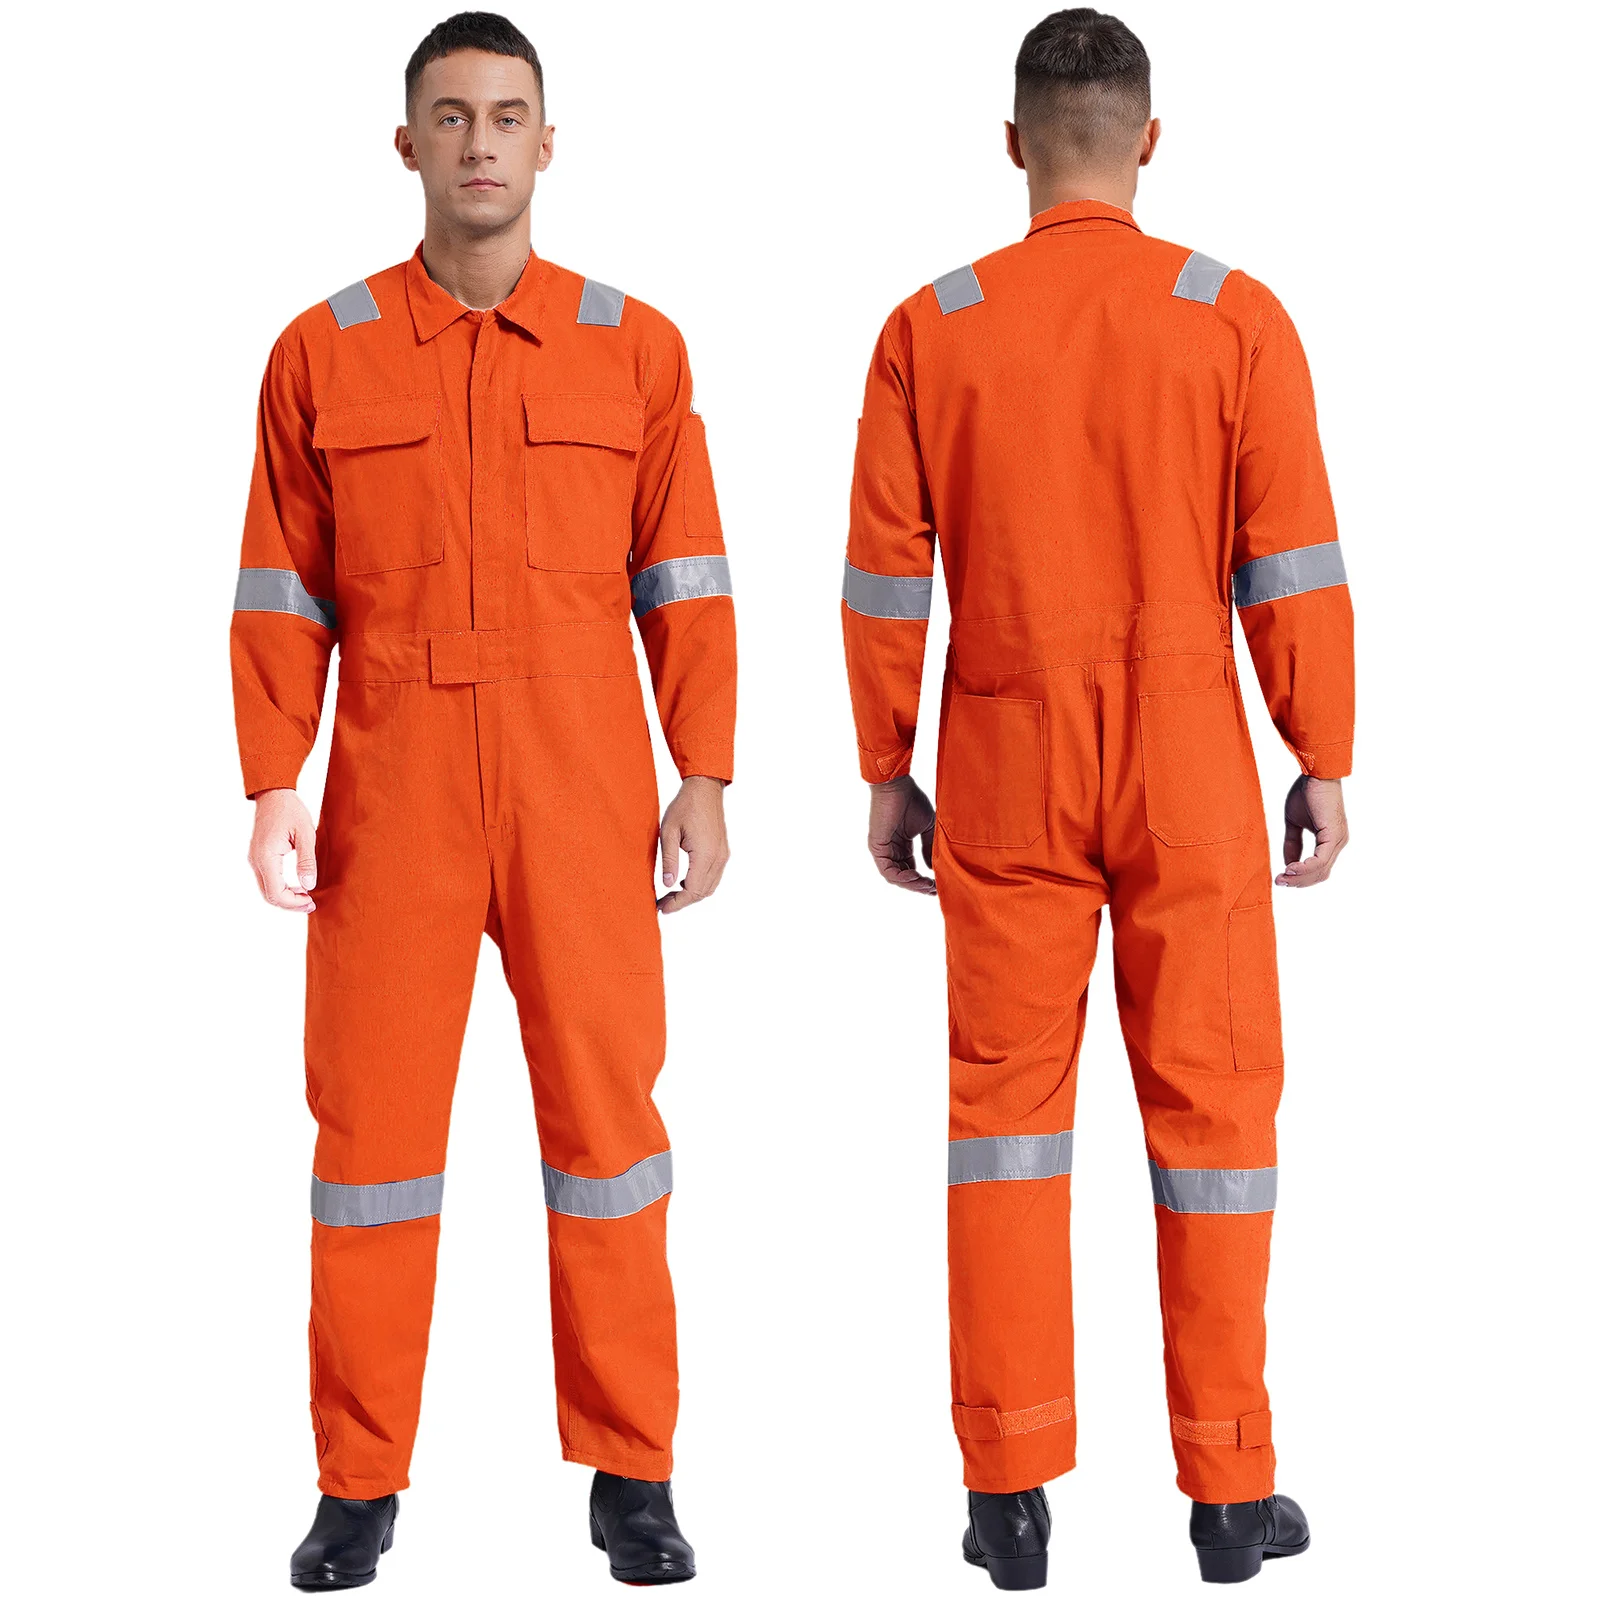 

Adult Dust-free Work Overalls Workshop Uniform Long Sleeve Cotton Reflective Strips Jumpsuit Coveralls for Factory Maintenance